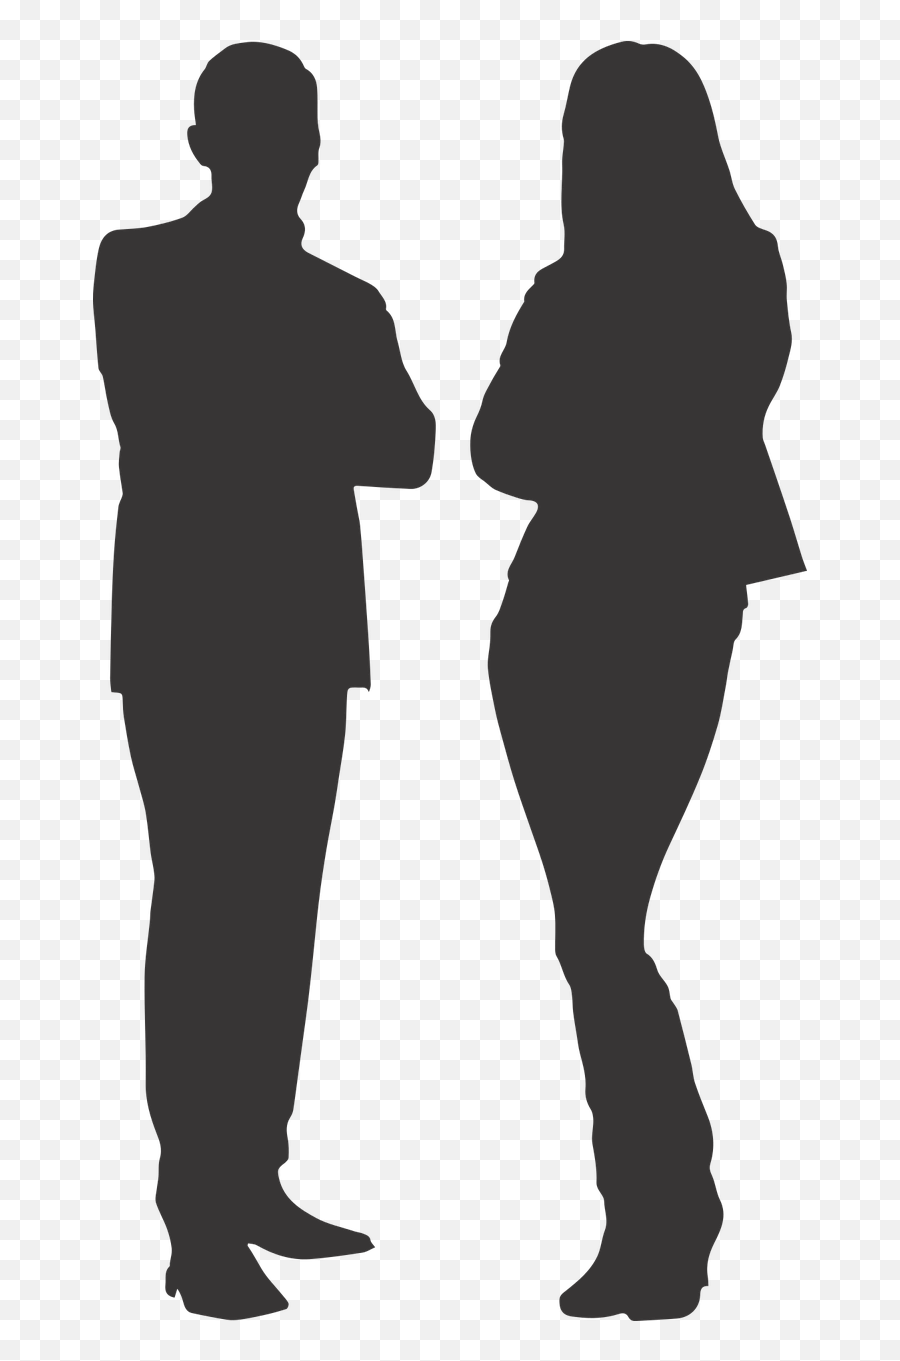 Man Silhouette Transparent - Man And Woman Silhouette Transparent Emoji,Floating Man Emoji